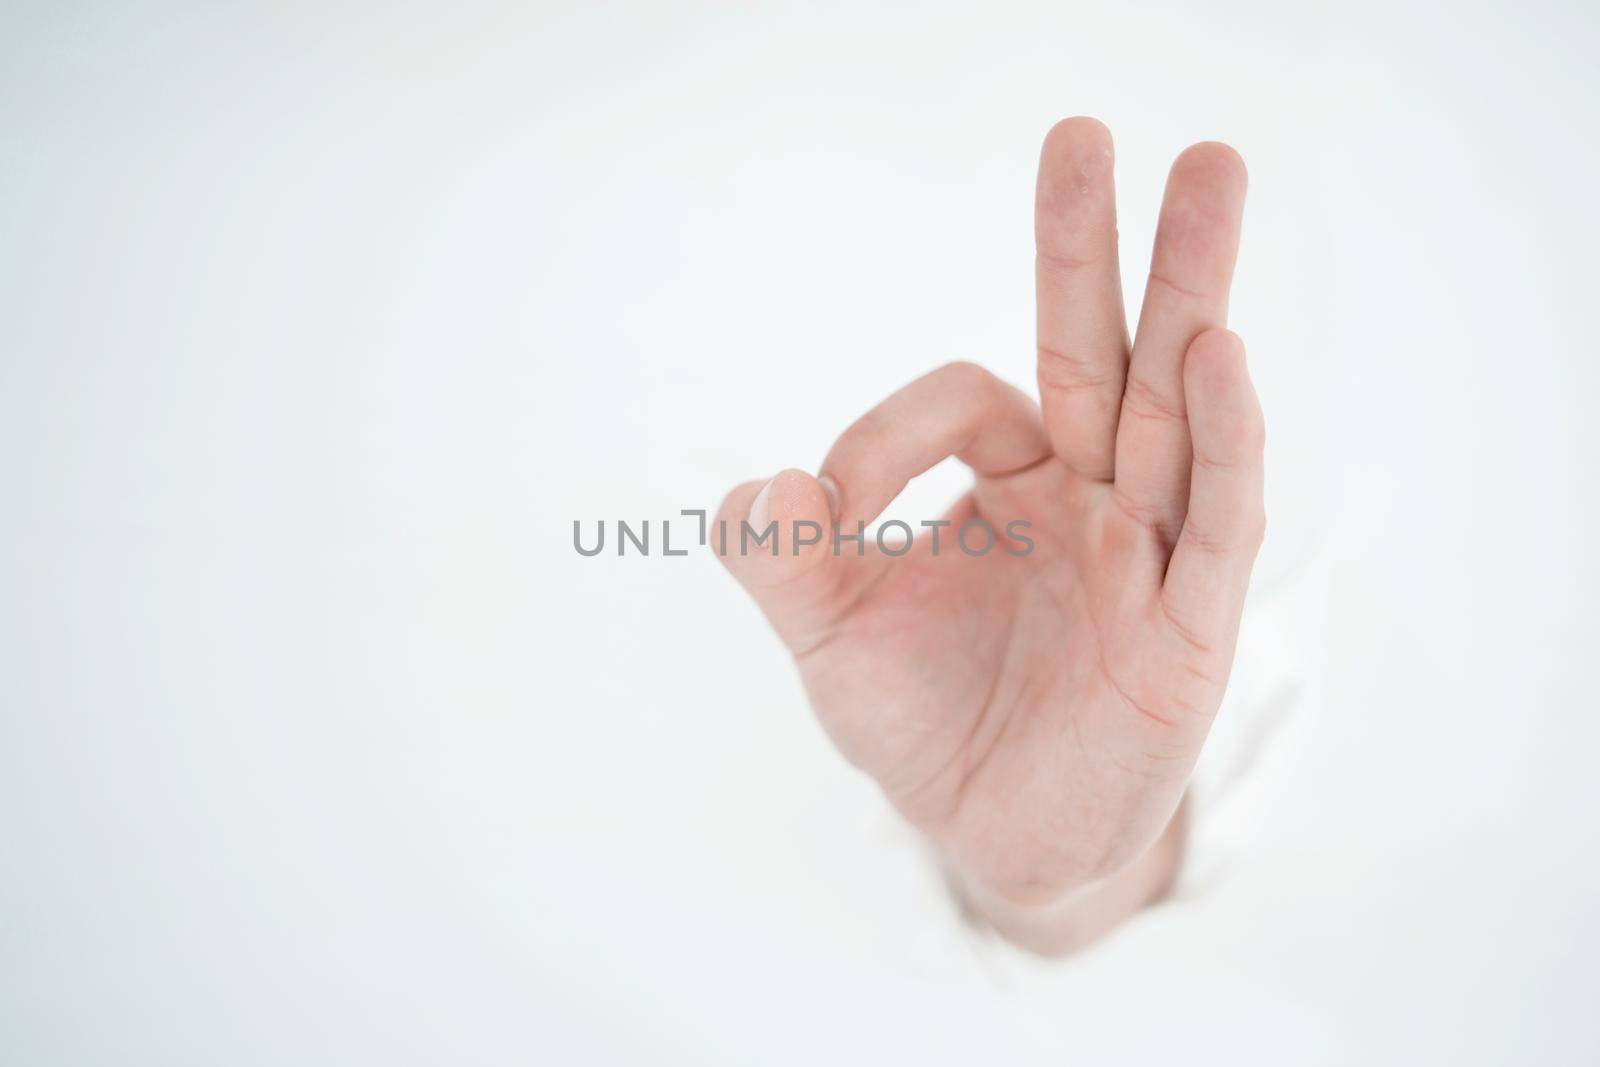 man's hand breaking through the paper wall and pointing at you by asdf